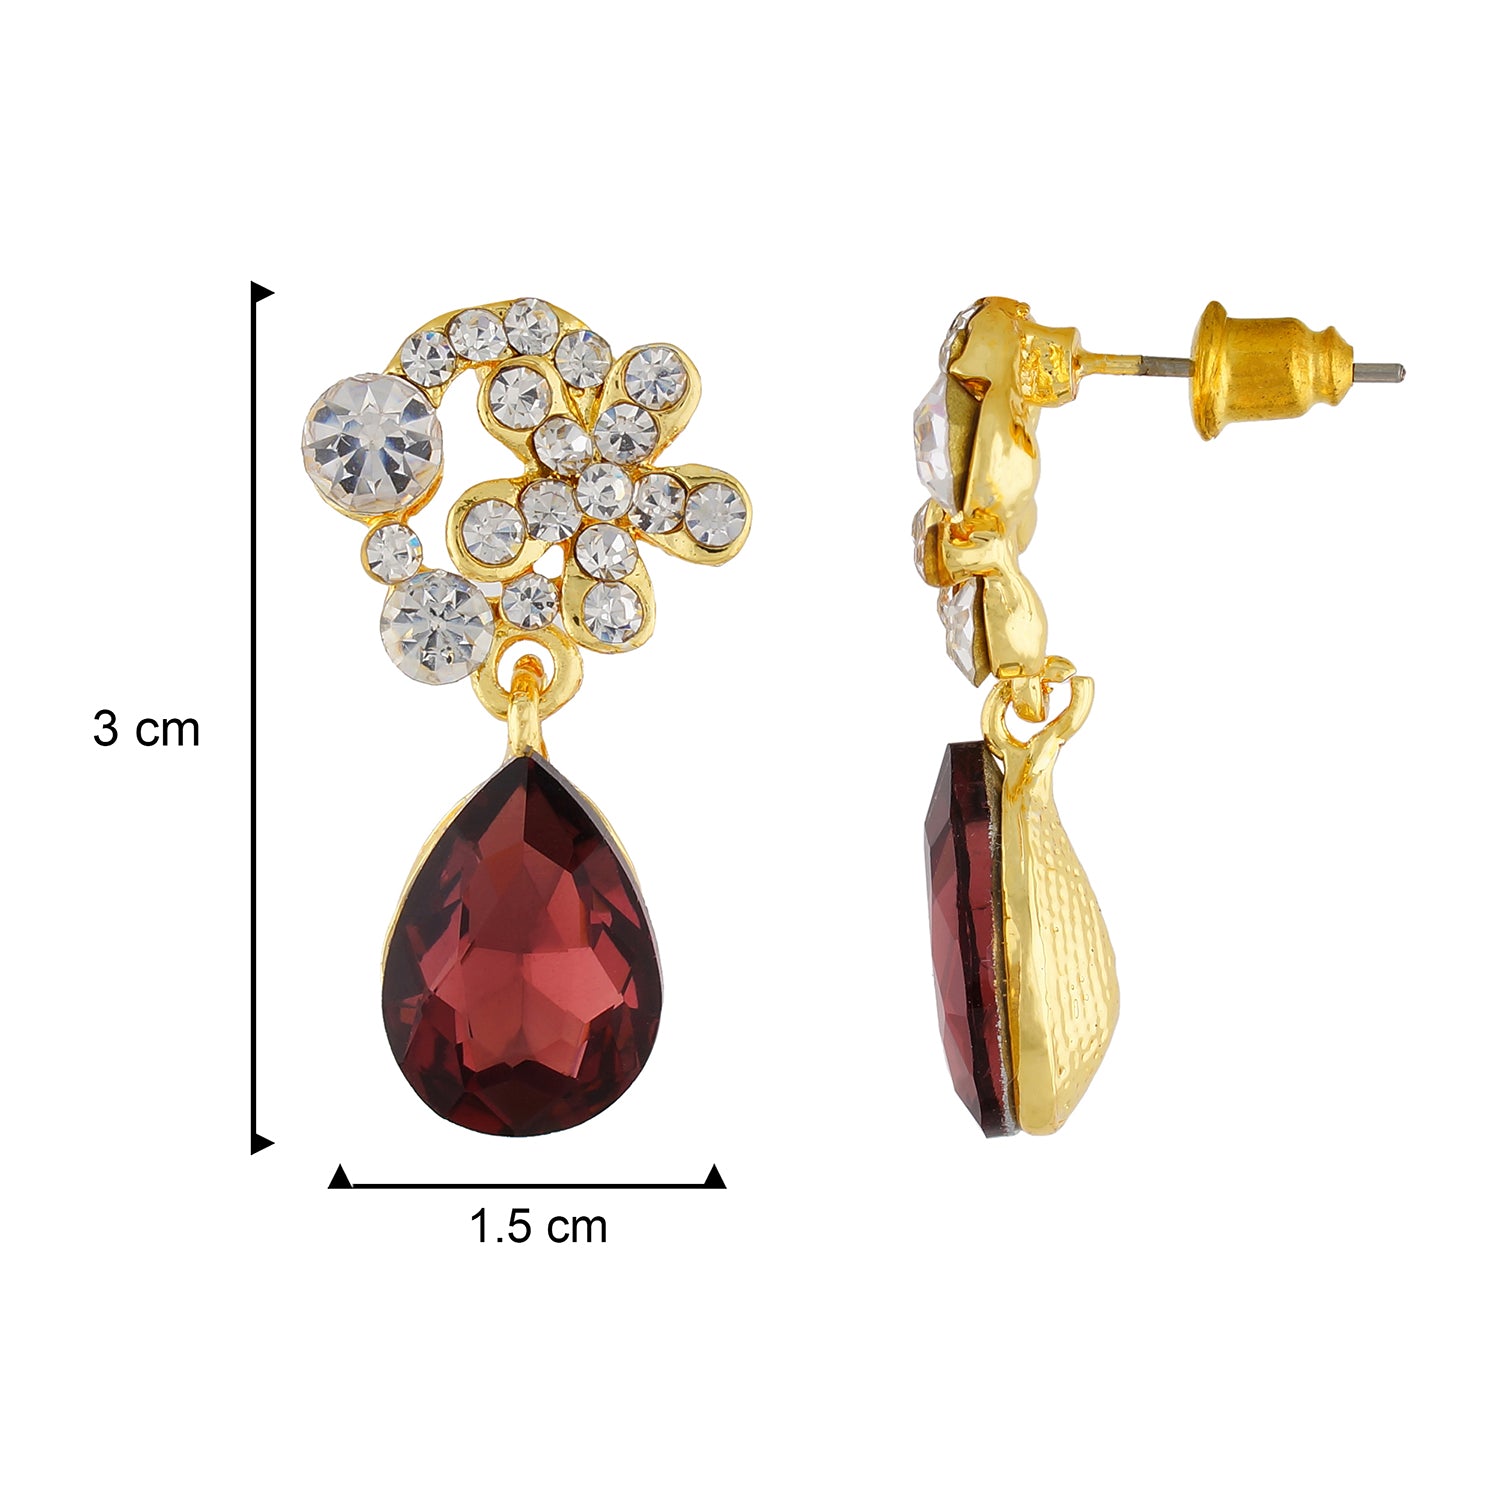 Exclusive Gold Colour Floral Design Earring with Maroon Drop for Girls and Women